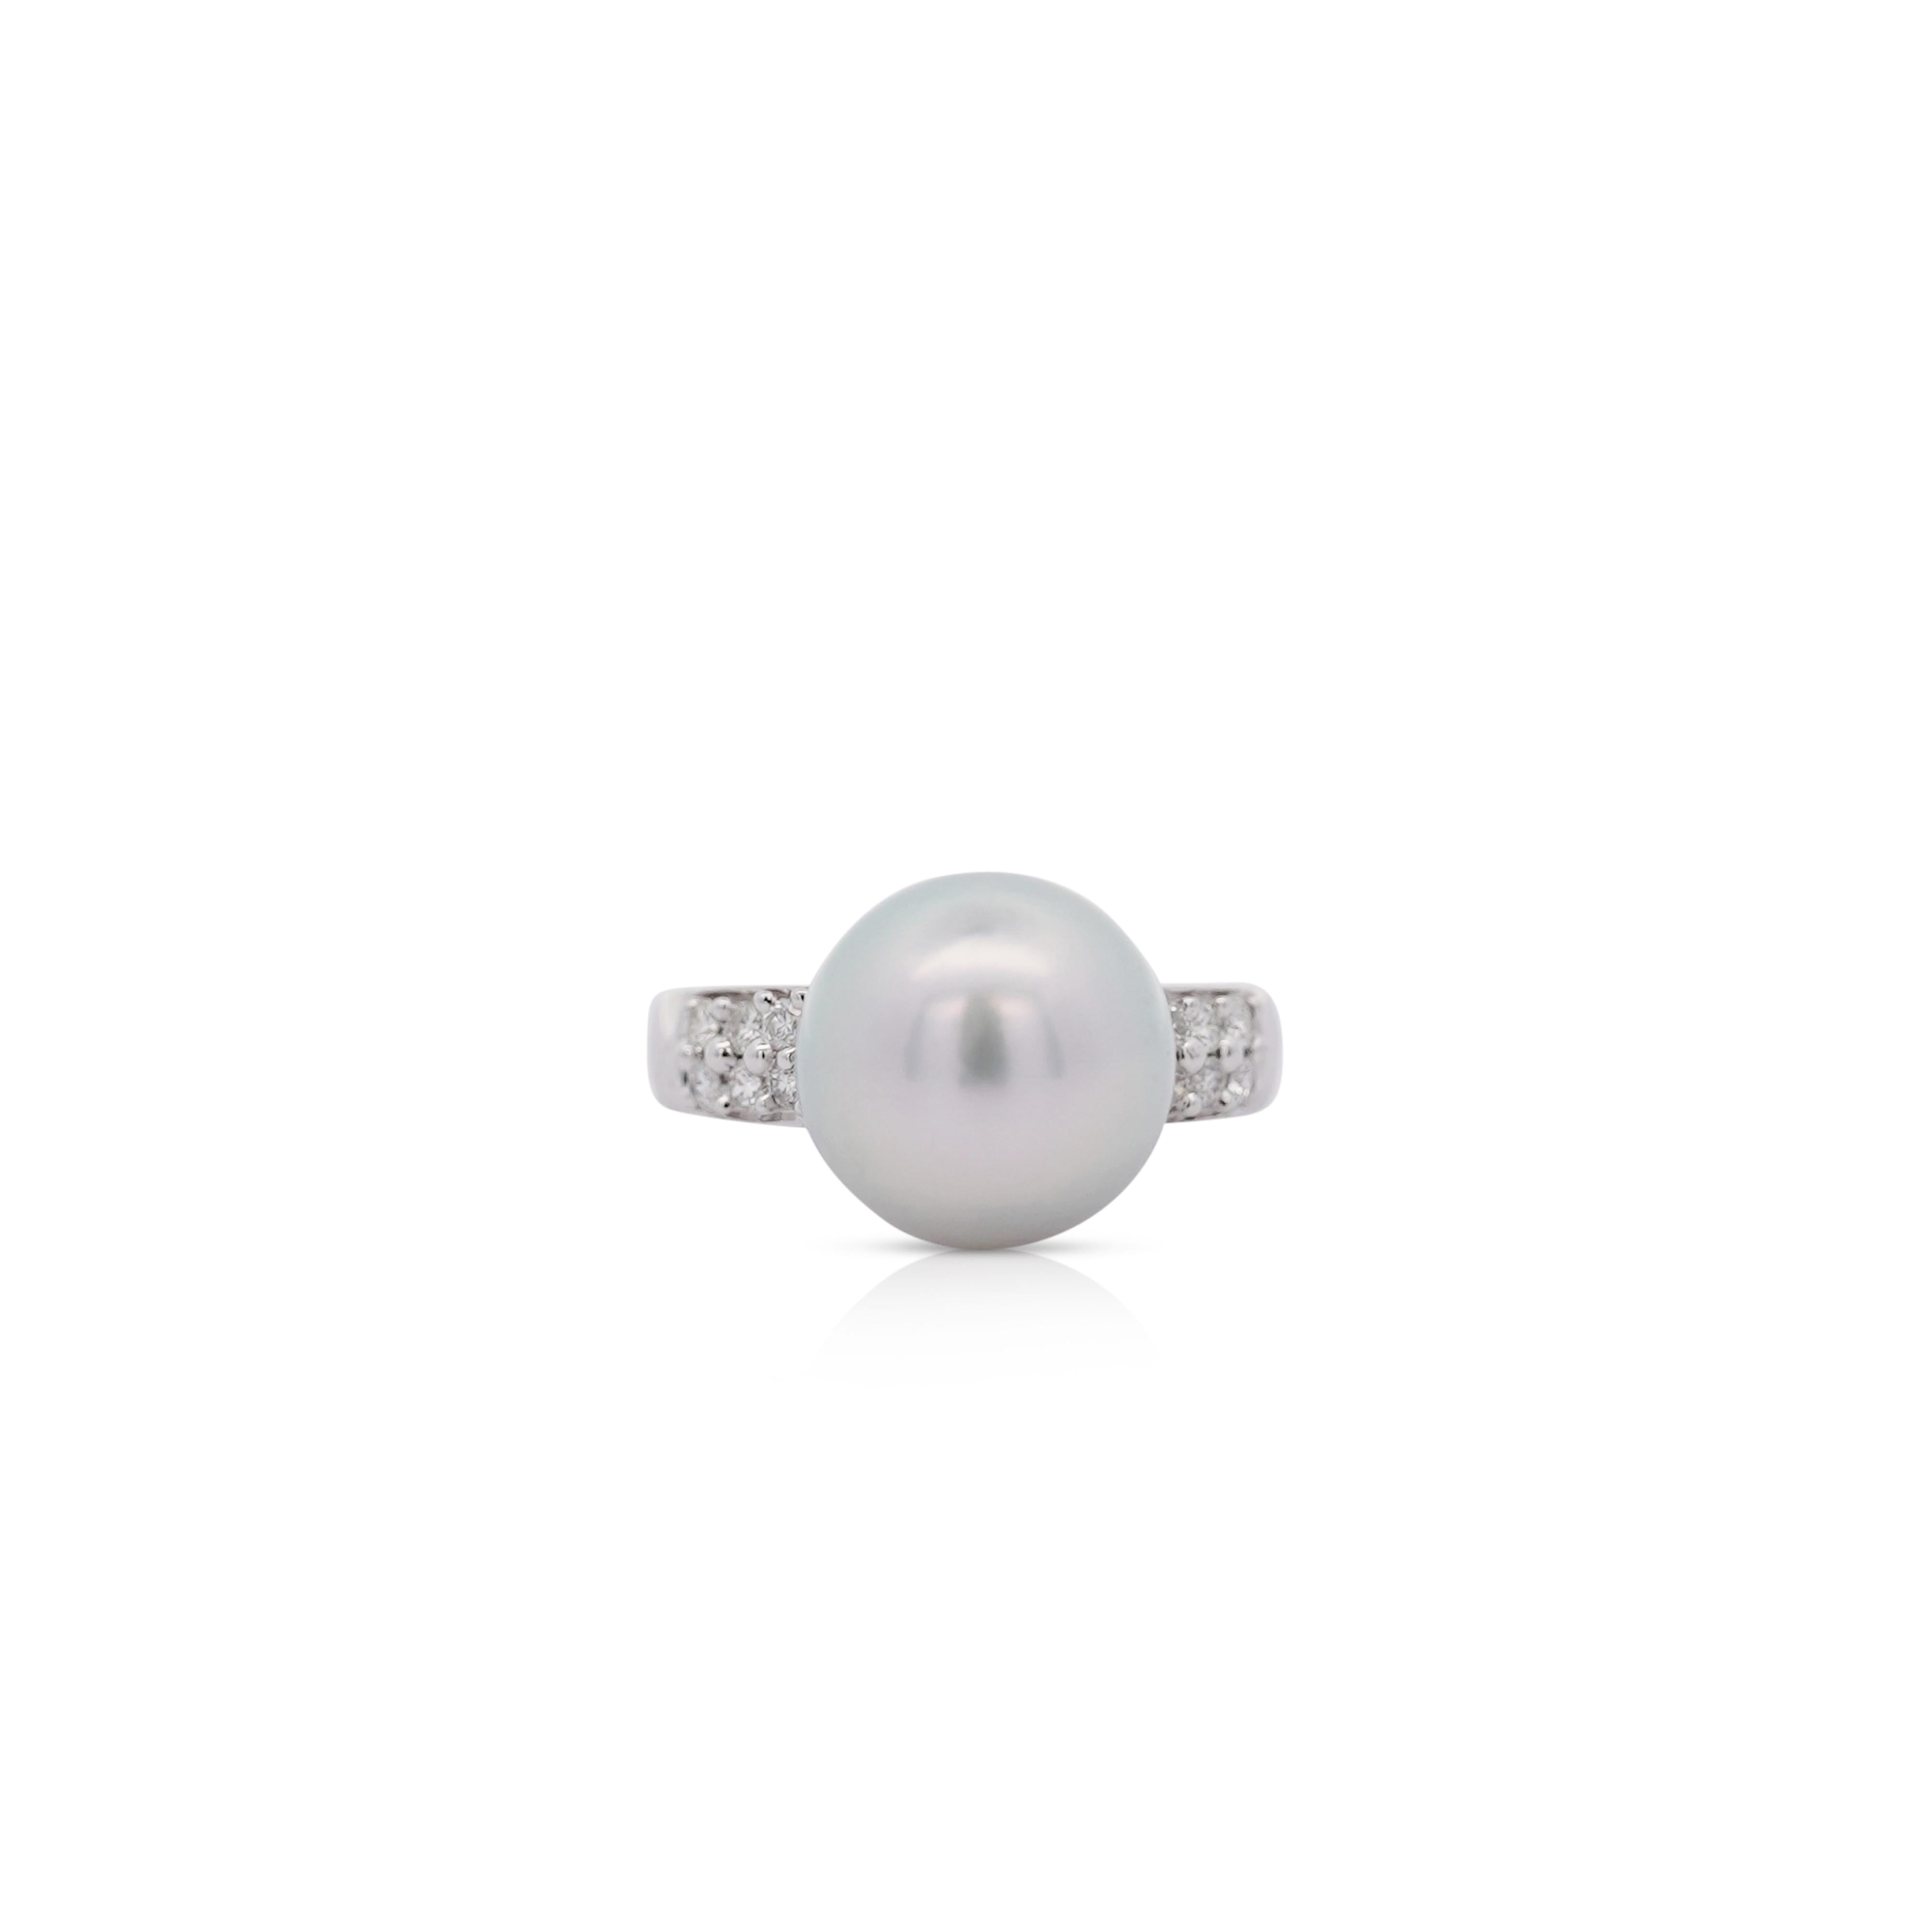 12mm Cultured South Sea Pearl & Round Diamond Ring in Platinum